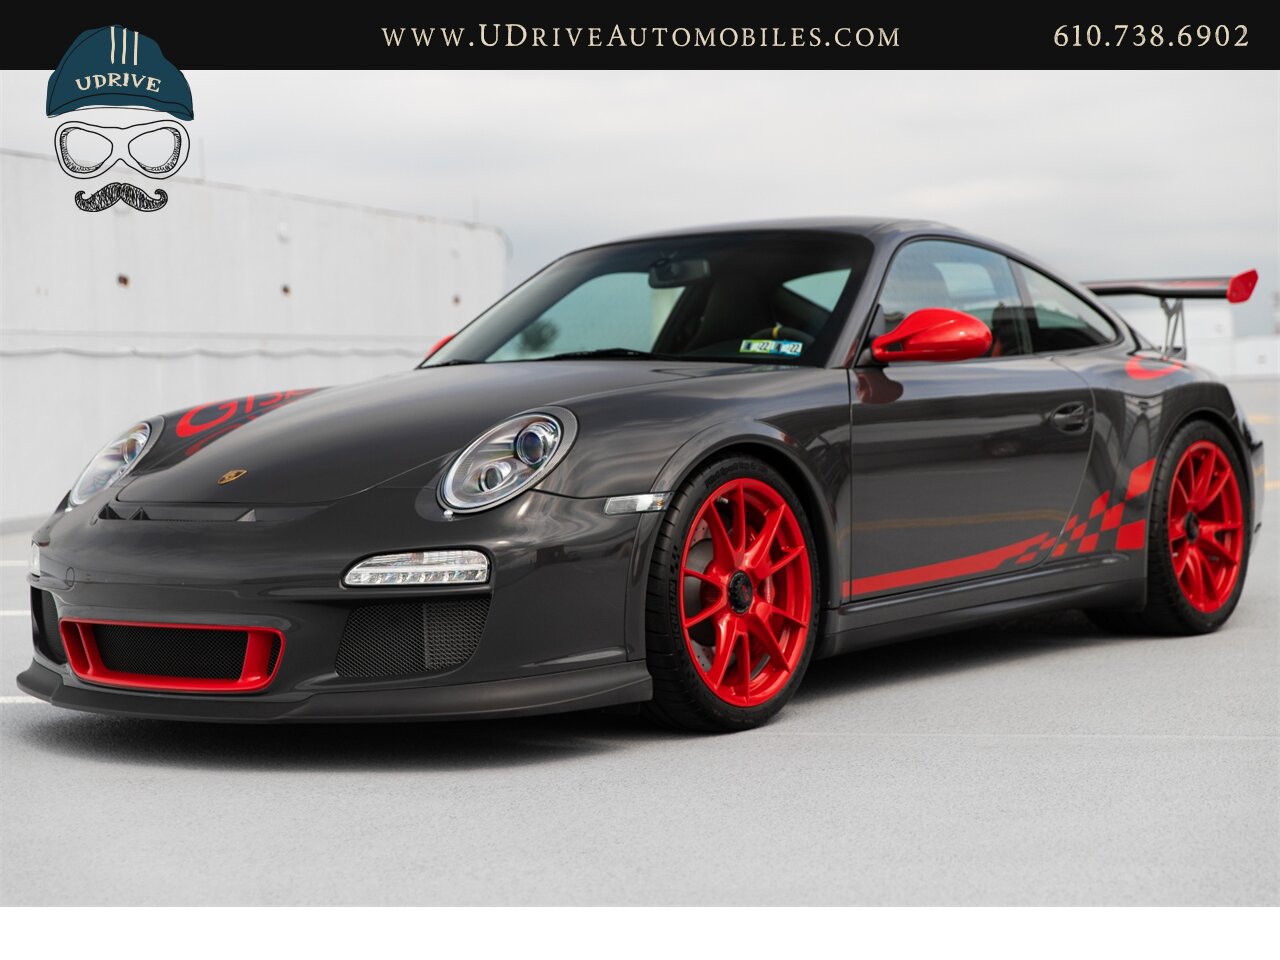 2010 Porsche 911 GT3 RS 1k Miles Dev Red Stitching Throughout  Front Axle Lift Sport Chrono 997.2 - Photo 9 - West Chester, PA 19382